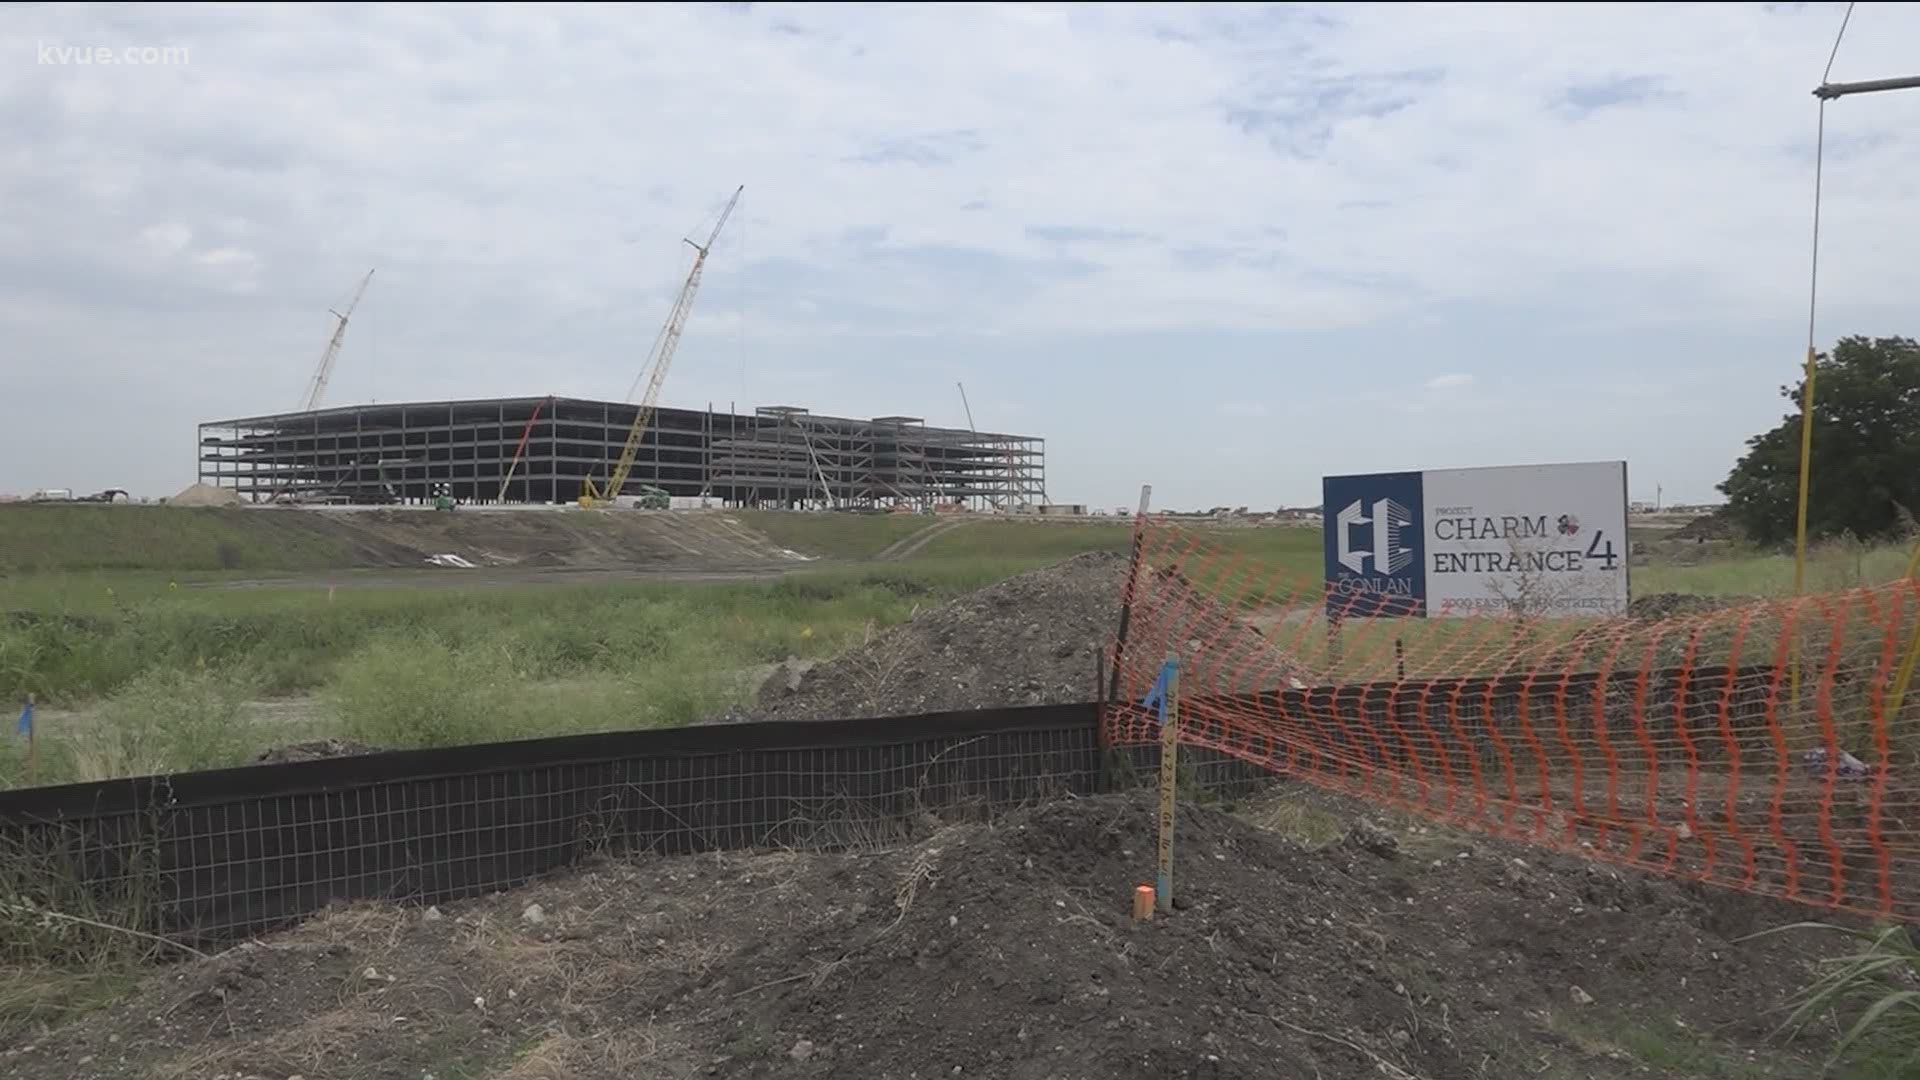 Amazon confirmed Wednesday that it is opening a huge warehouse in Pflugerville. The site is located off Pecan Street near Highway 130.